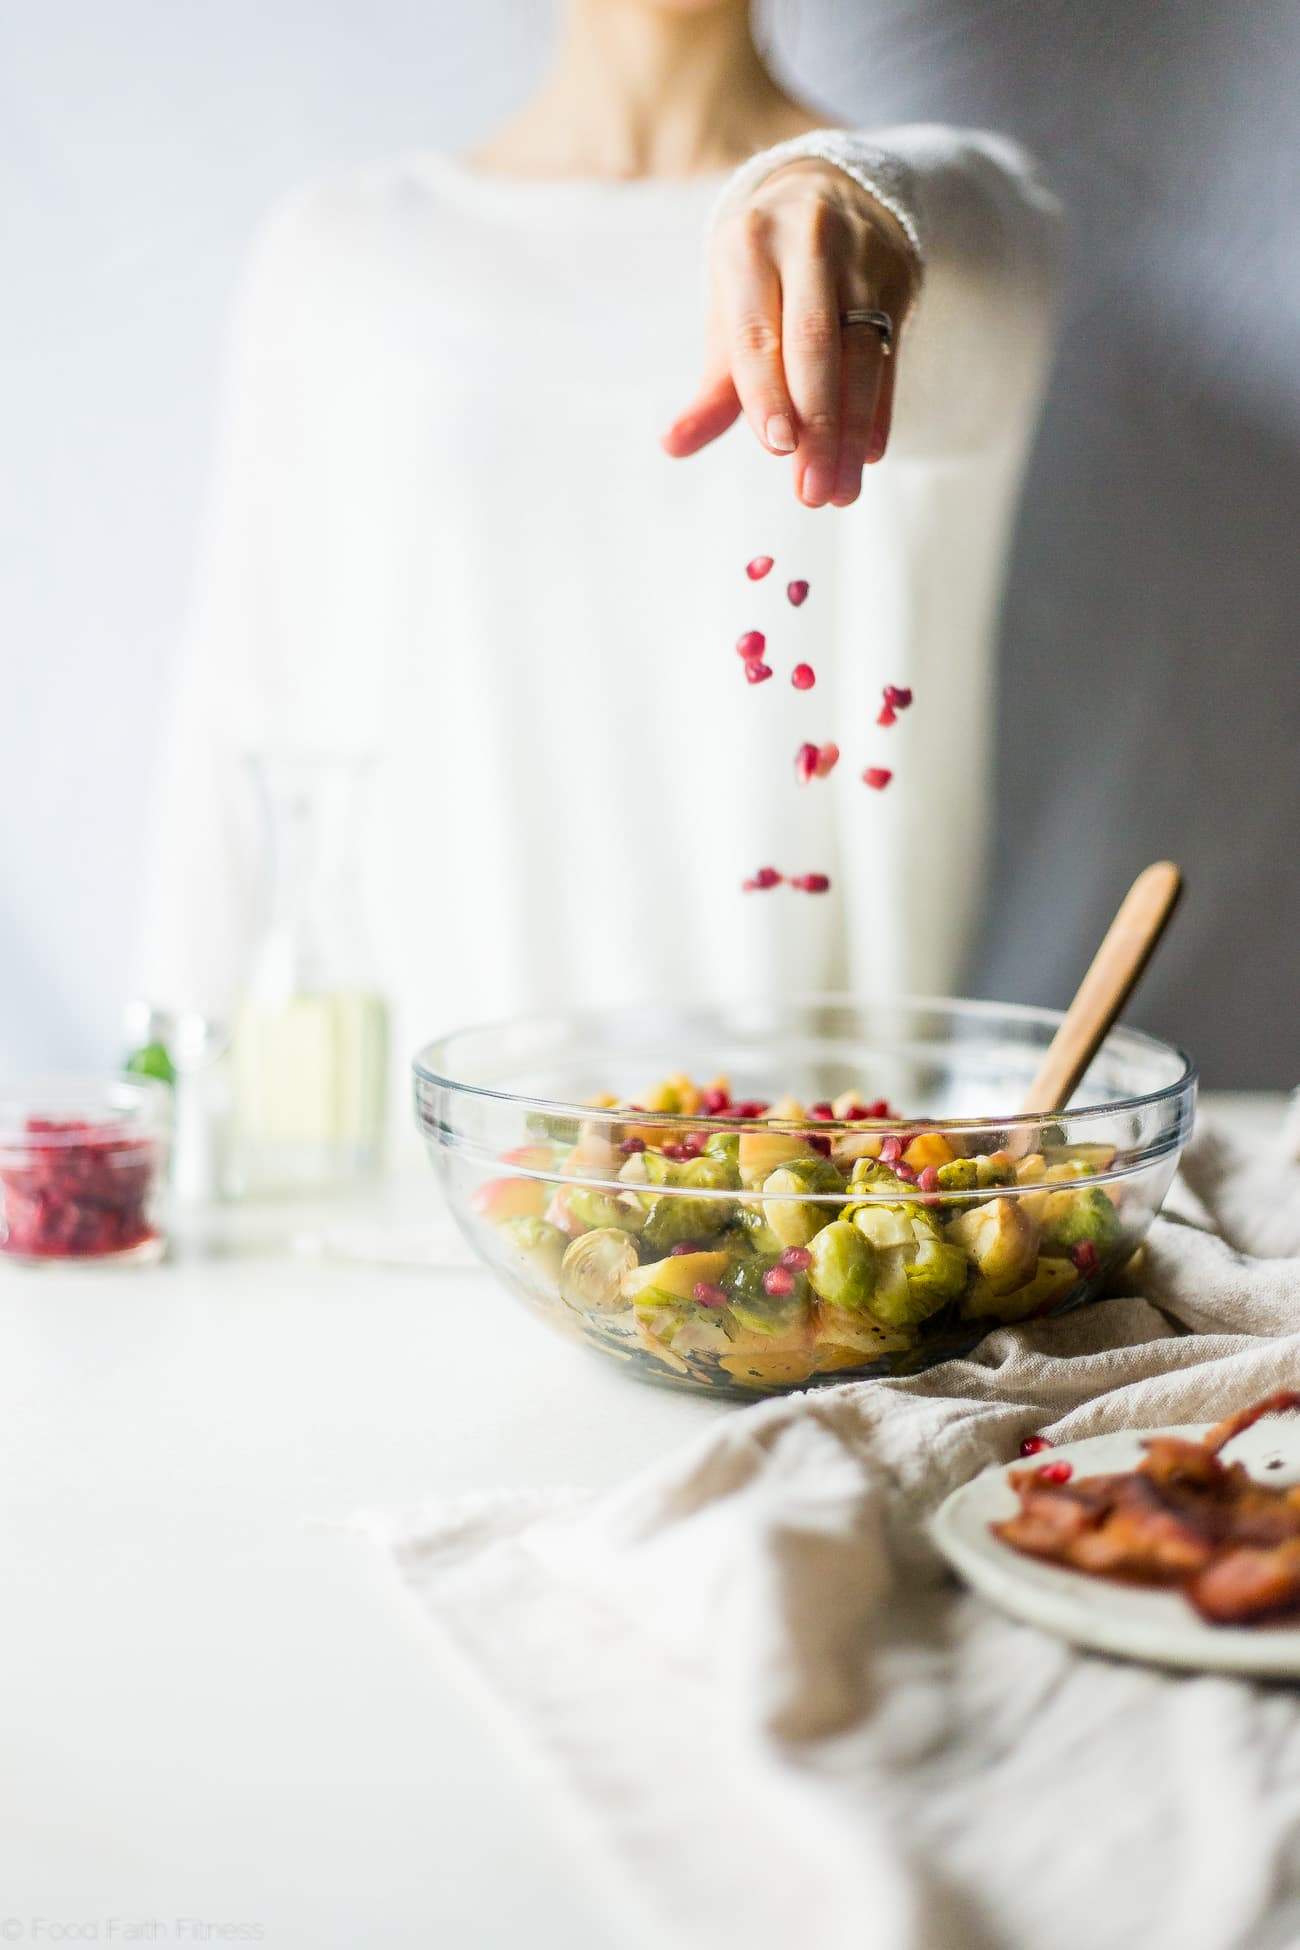 Superfood Roasted Brussels Sprouts with Bacon - These salty-sweet roasted Brussels sprouts are tender, crispy and have a surprise superfood pomegranate crunch! They're the perfect, paleo-friendly healthy Thanksgiving side! | Foodfaithfitness.com | @FoodFaithFit